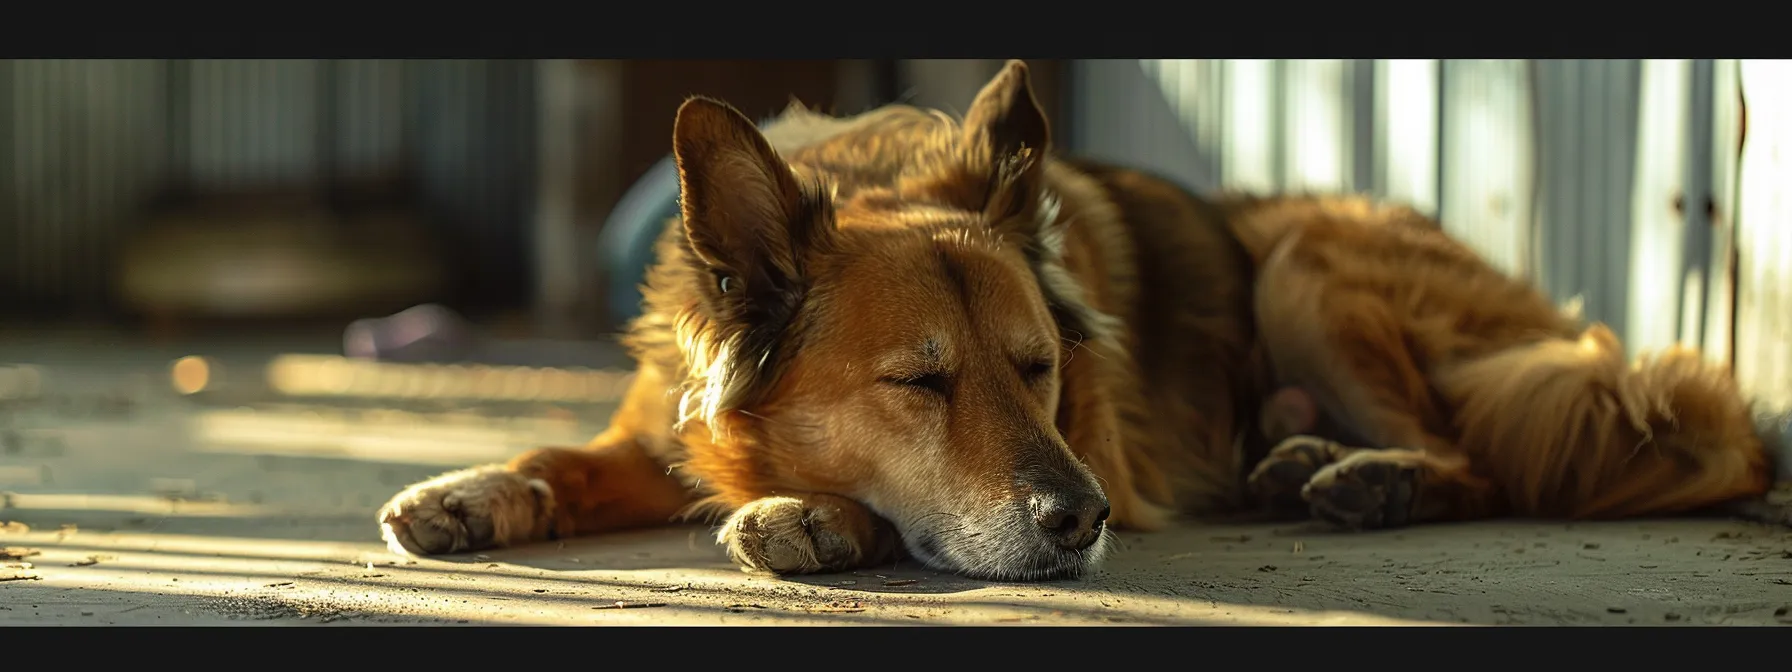 a dog peacefully resting in a quiet environment while an ultrasonic device emits high-frequency sounds in the background.